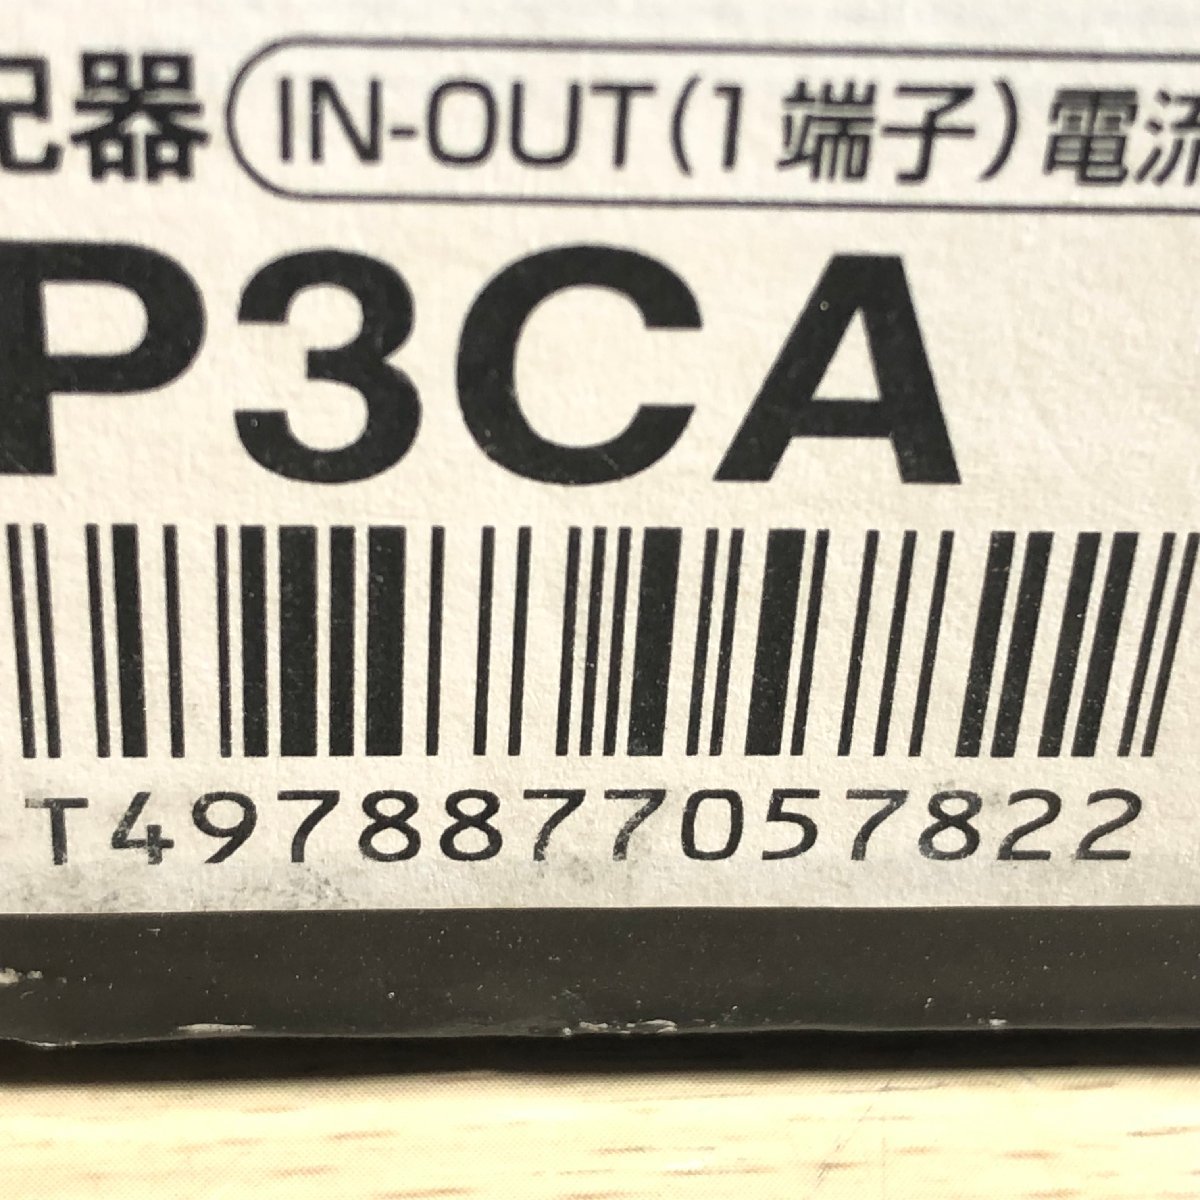 SP3CA 1 terminal electric current passing type 3 distributor trout Pro [ unused breaking the seal goods ] #K0042474